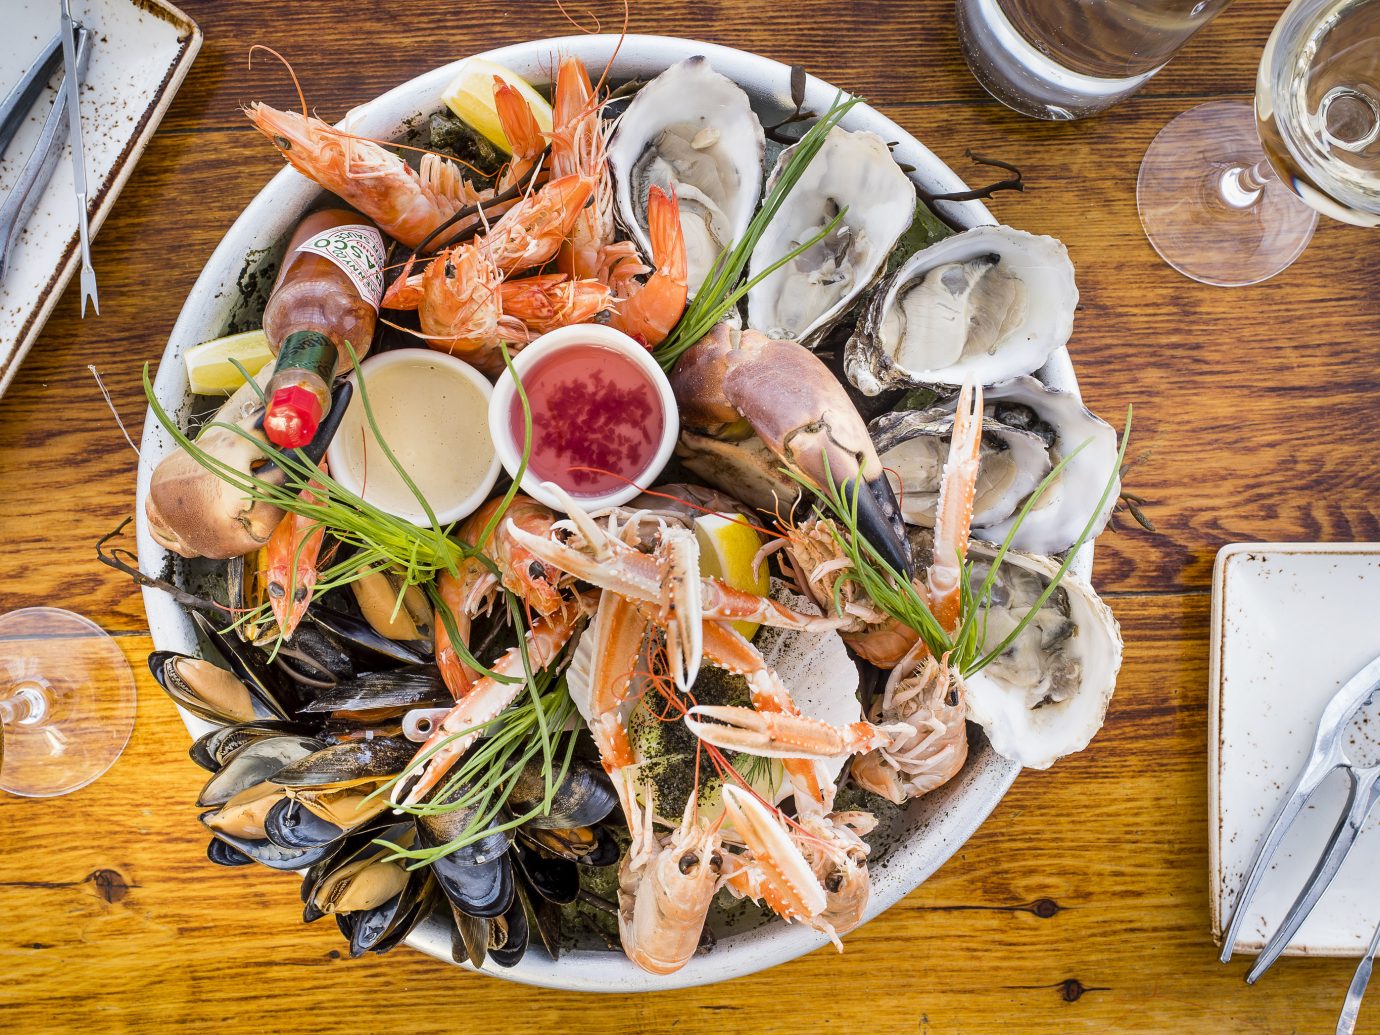 Trip Ideas table plate food dish meal cuisine fish Seafood produce mussel dinner variety